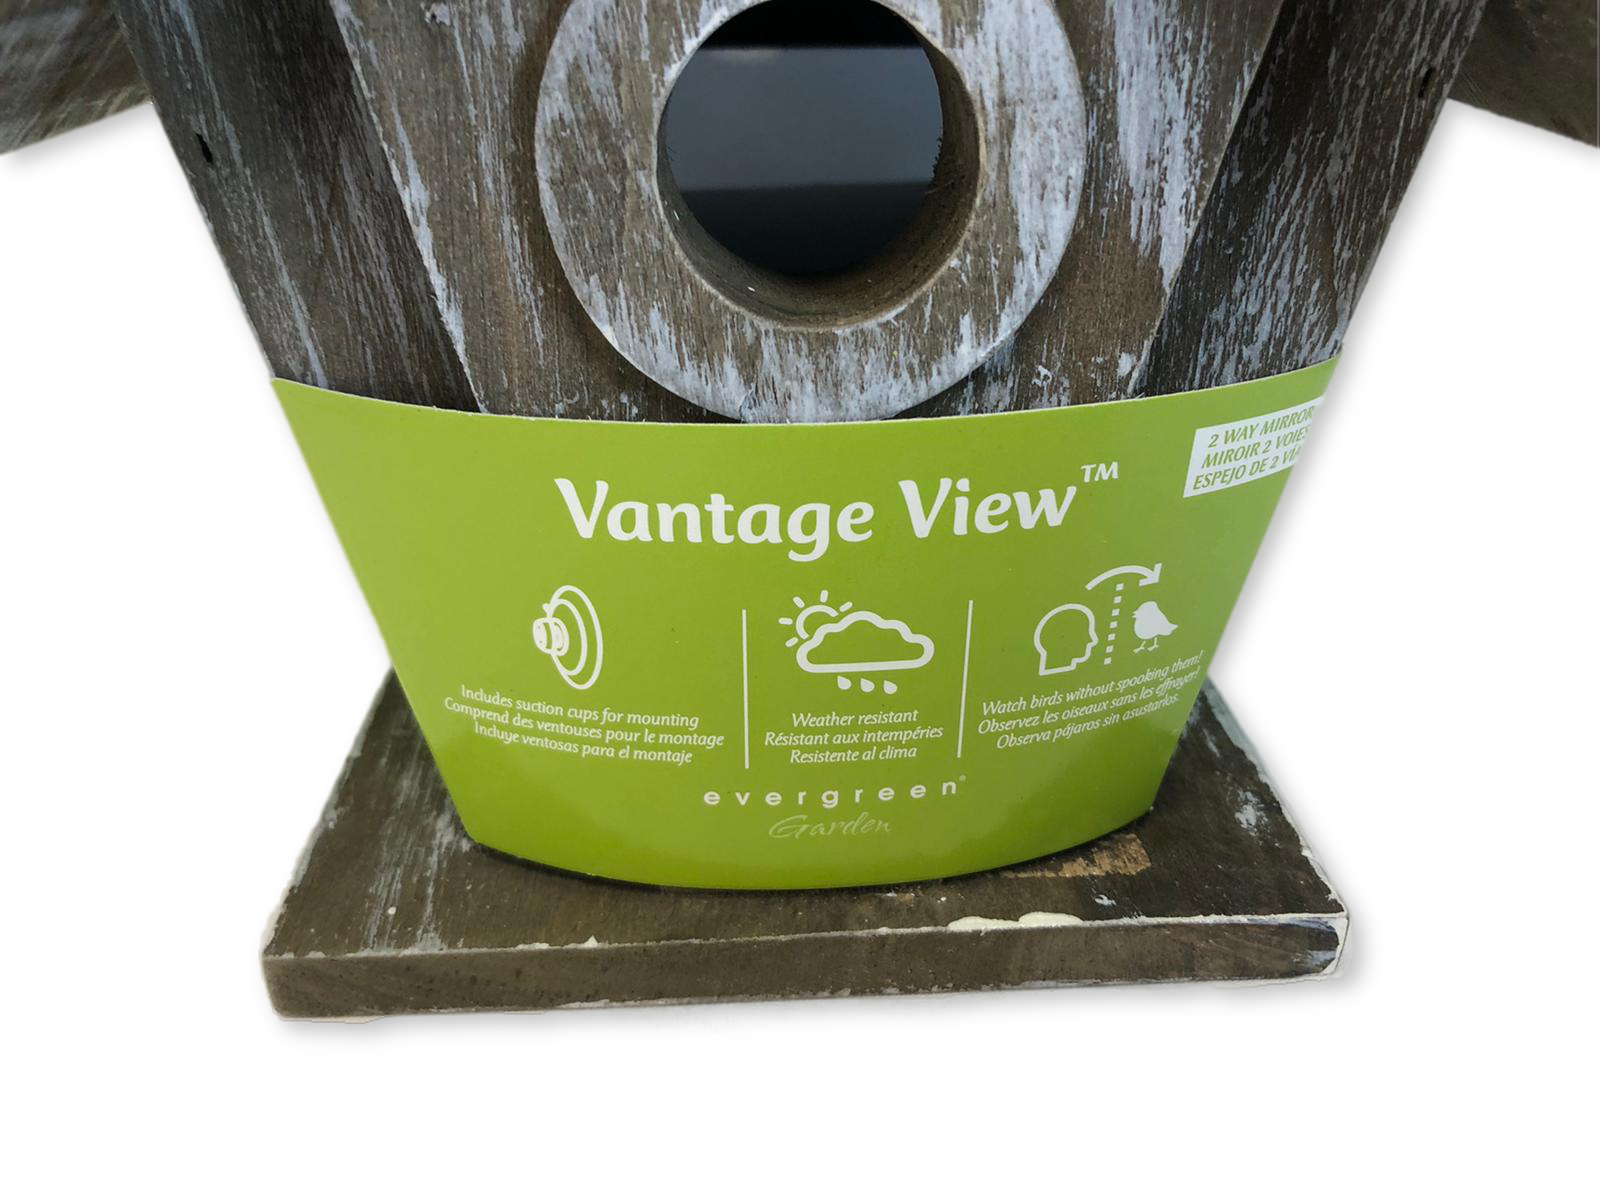 Vantage View Wooden Birdhouse by Evergreen